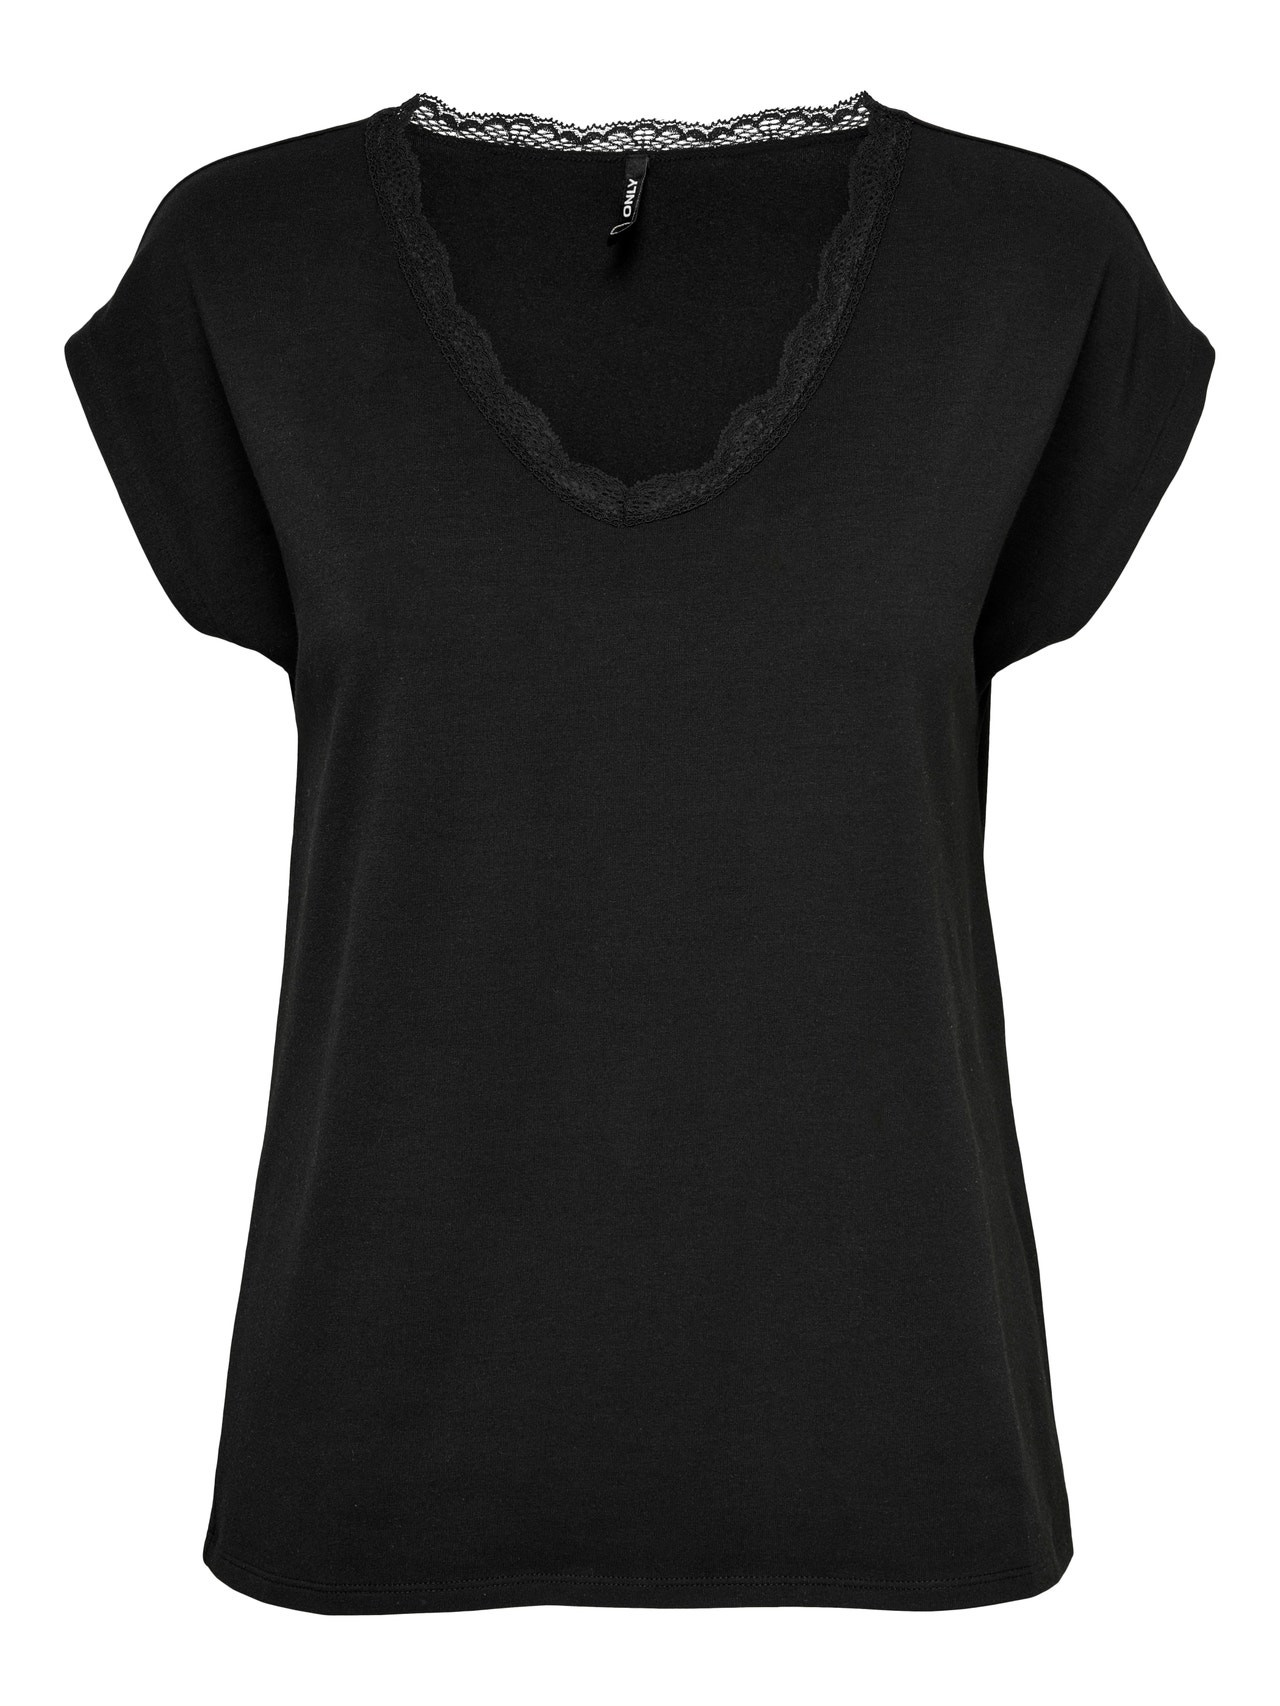 ONLY Top with lace edge -Black - 15271263